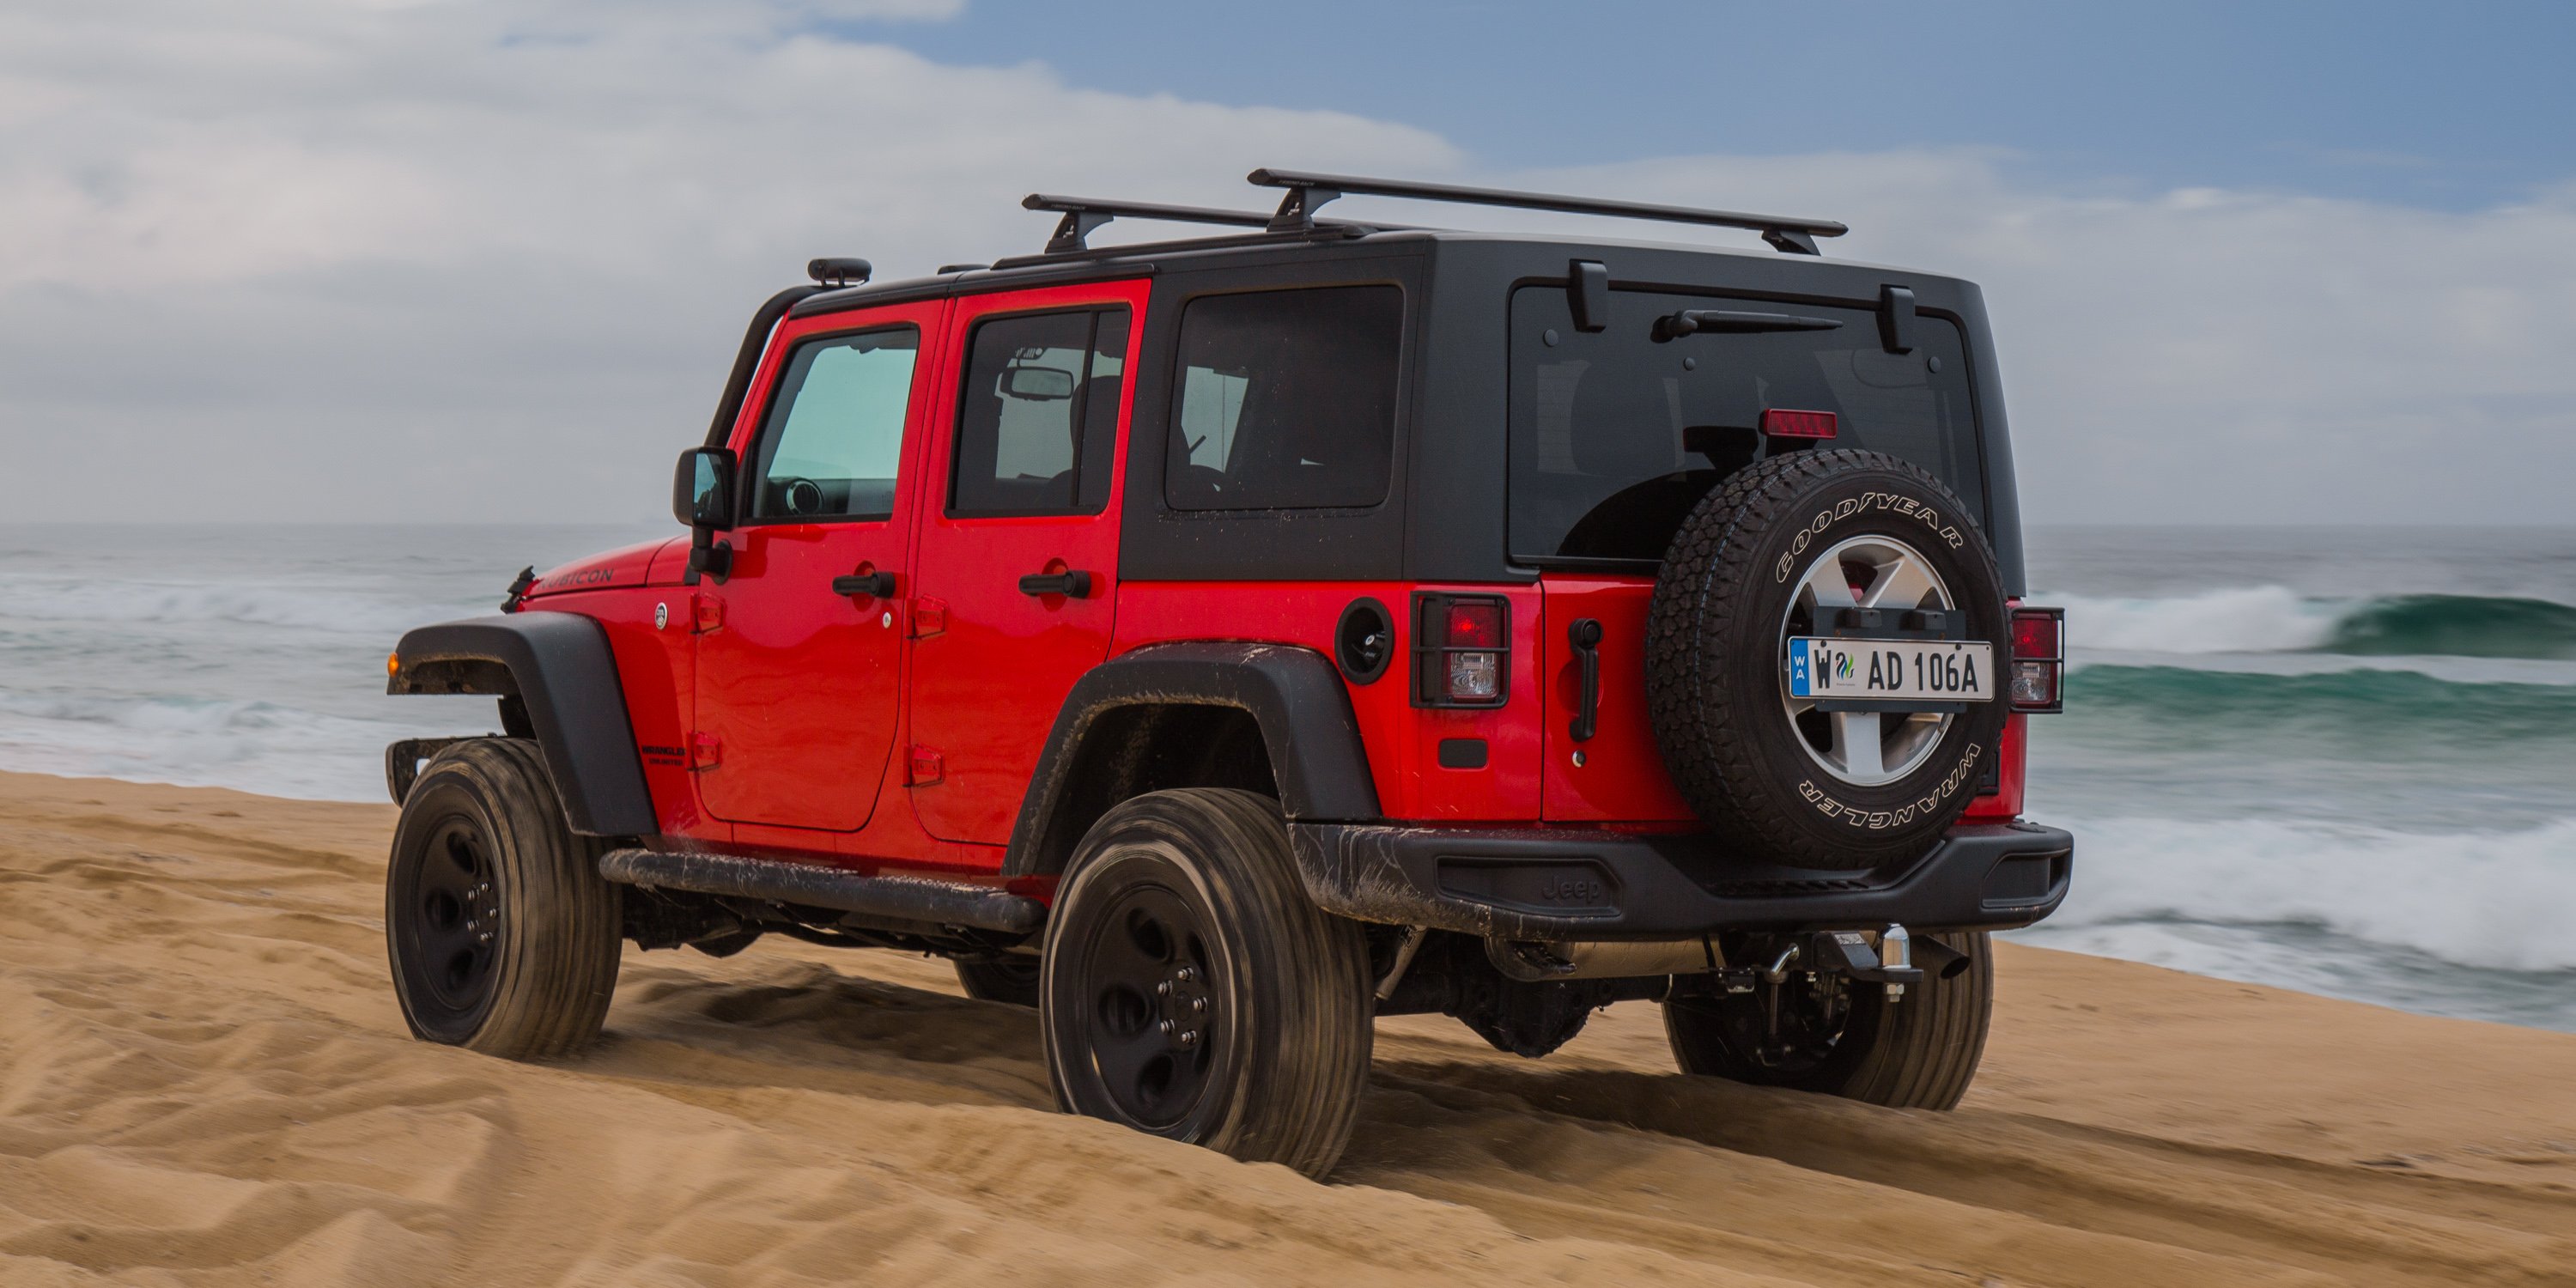 Hitting the beach in the 2017 Jeep Wrangler Unlimited